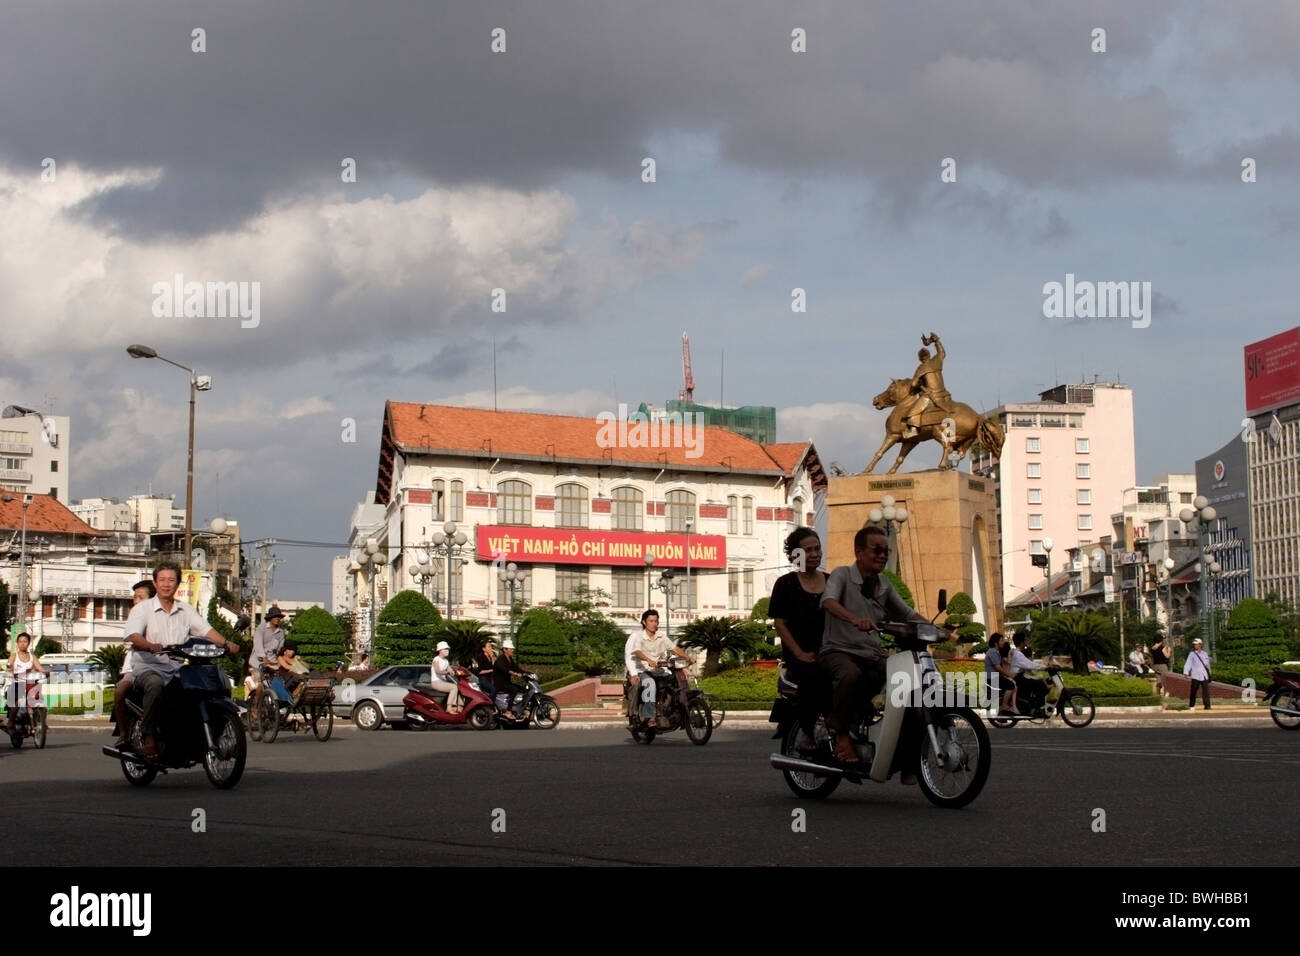 A group of people are driving their motorcycles in Saigon (Ho Chi Minh City) Vietnam. Stock Photo